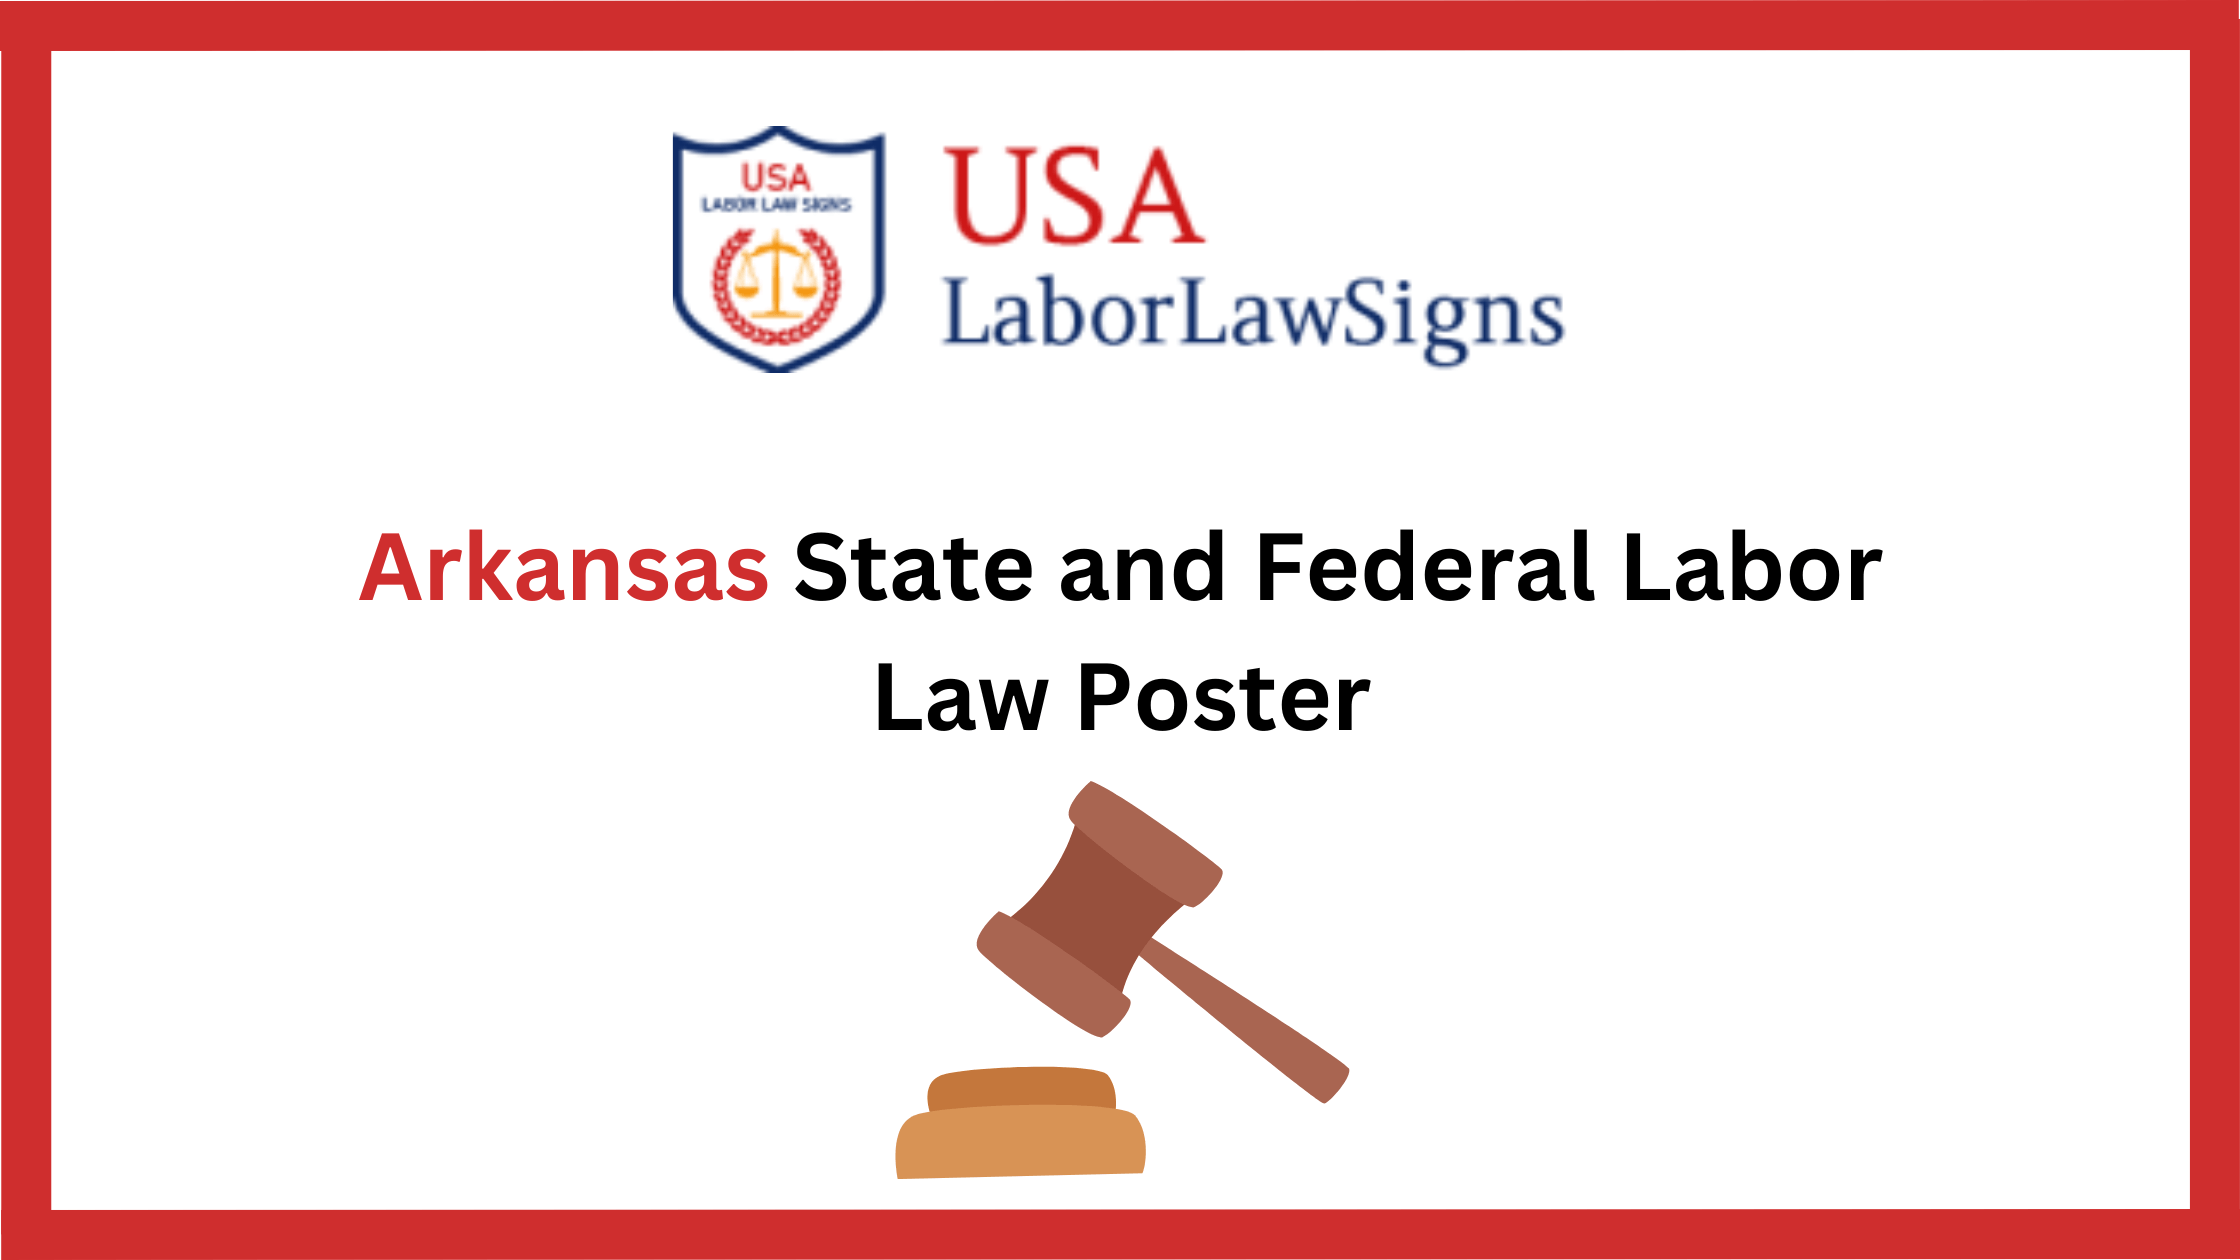 Importance of Keeping Your Arkansas State and Federal Labor Law Posters Up-to-Date